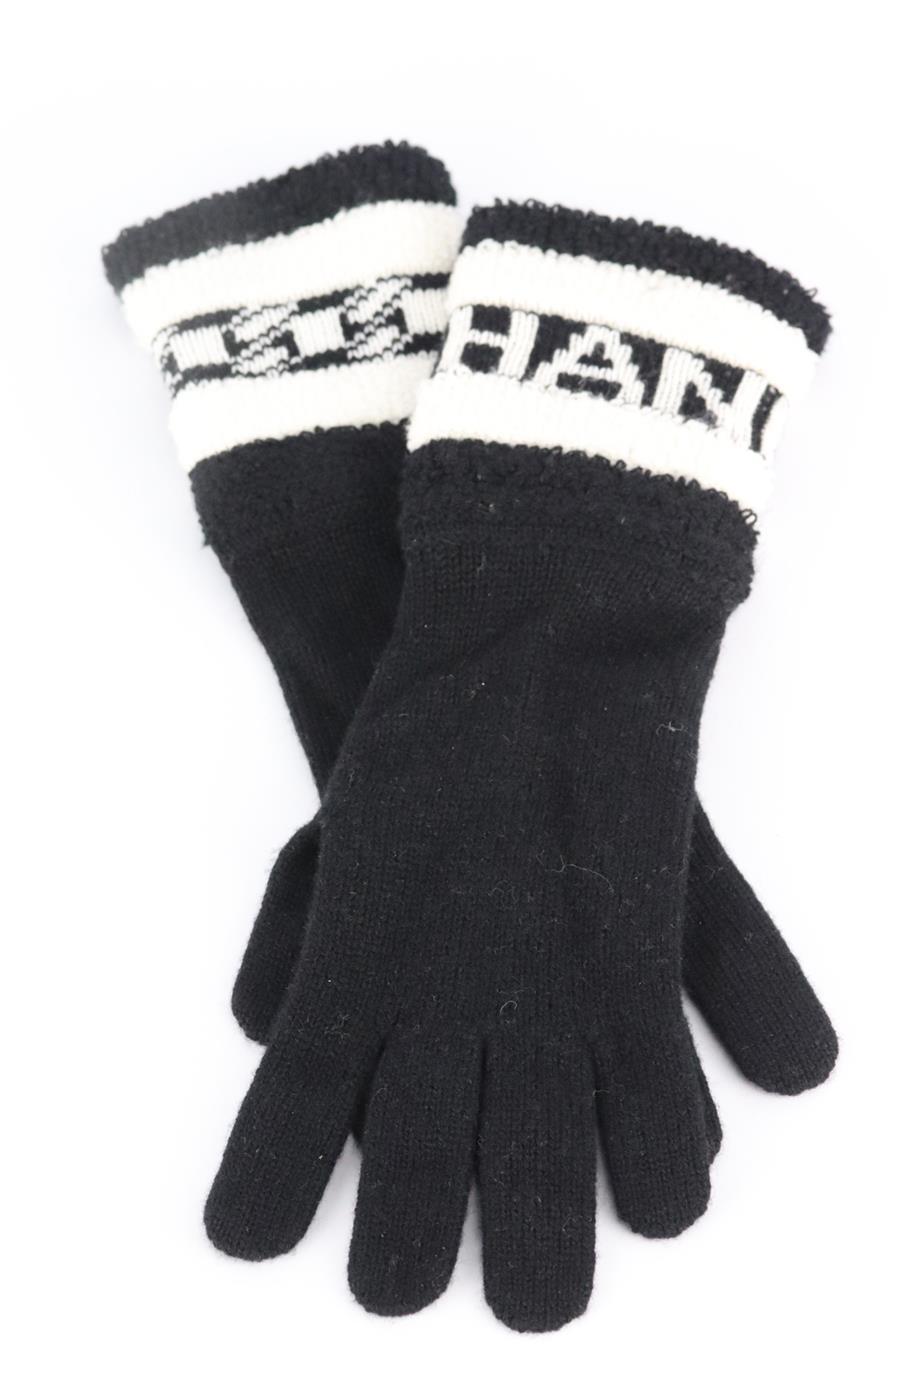 Chanel 2020 logo intarsia cashmere gloves. Black and white. Pull on. 100% Cashmere. Does not come with dustbag and box. Length: 12.5 in. Width: 3.5 in. Very good condition - No sign of wear; see pictures.